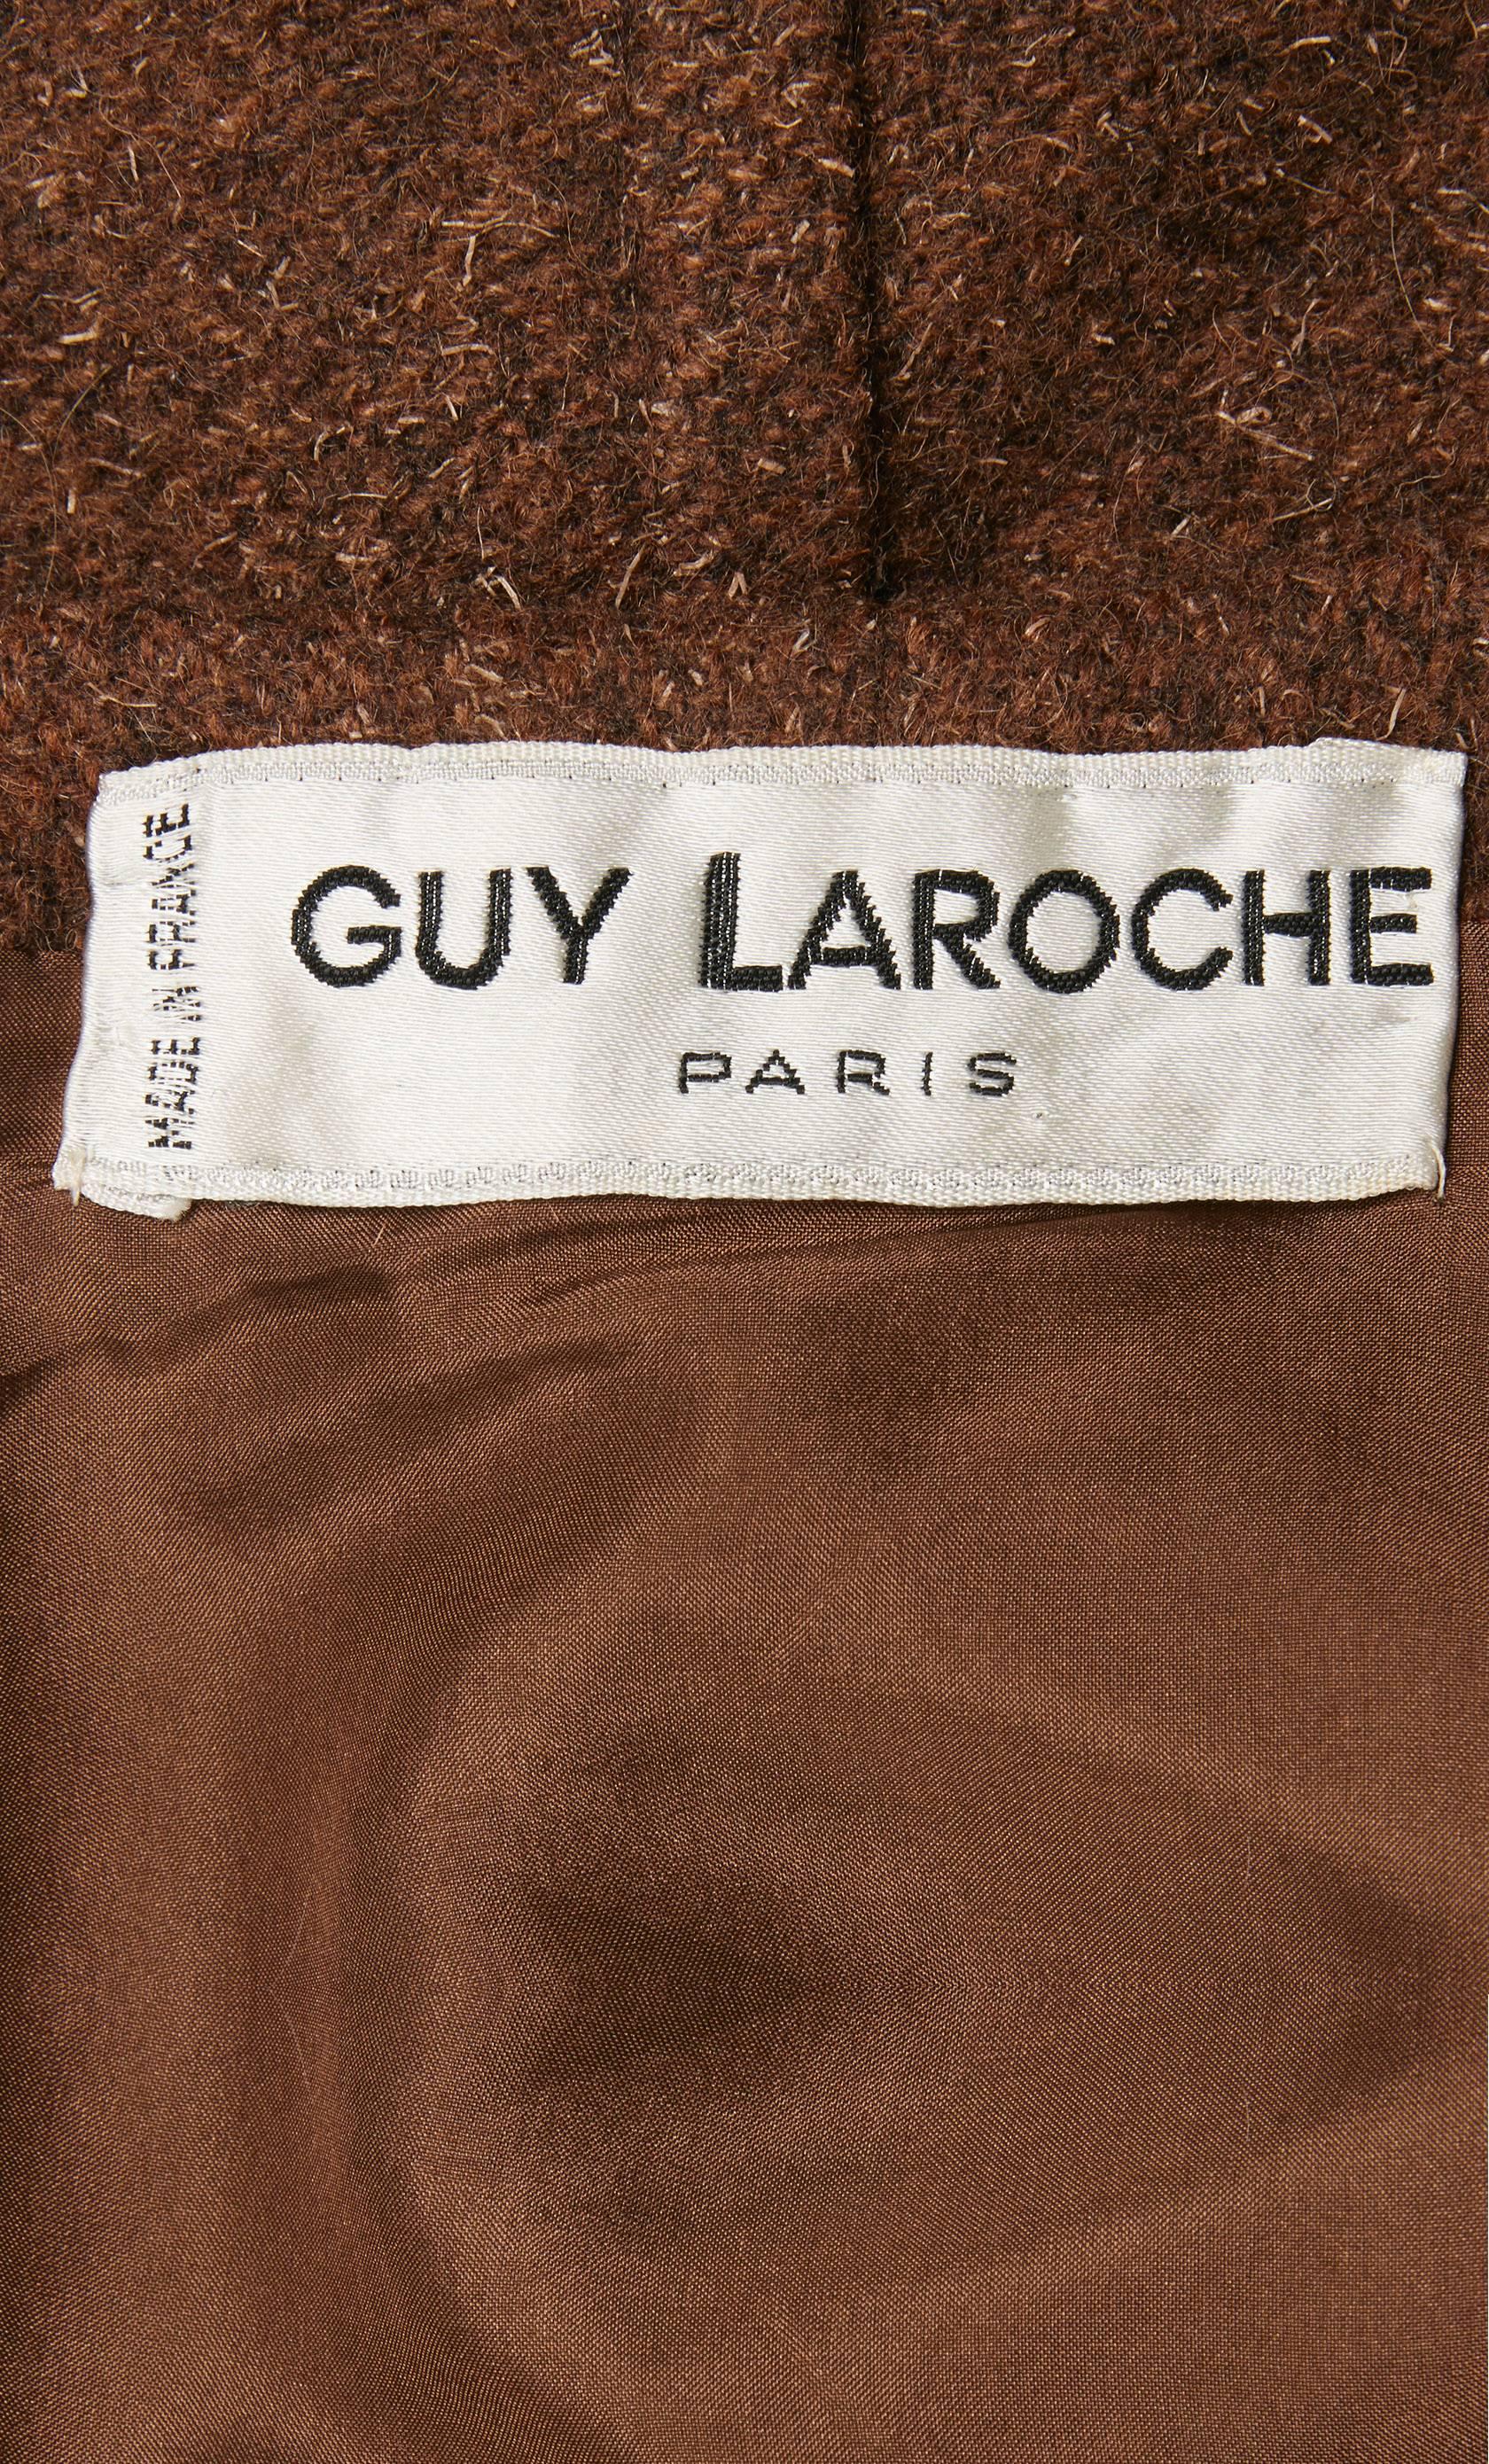 Guy Laroche haute couture brown skirt suit, circa 1957 For Sale 1